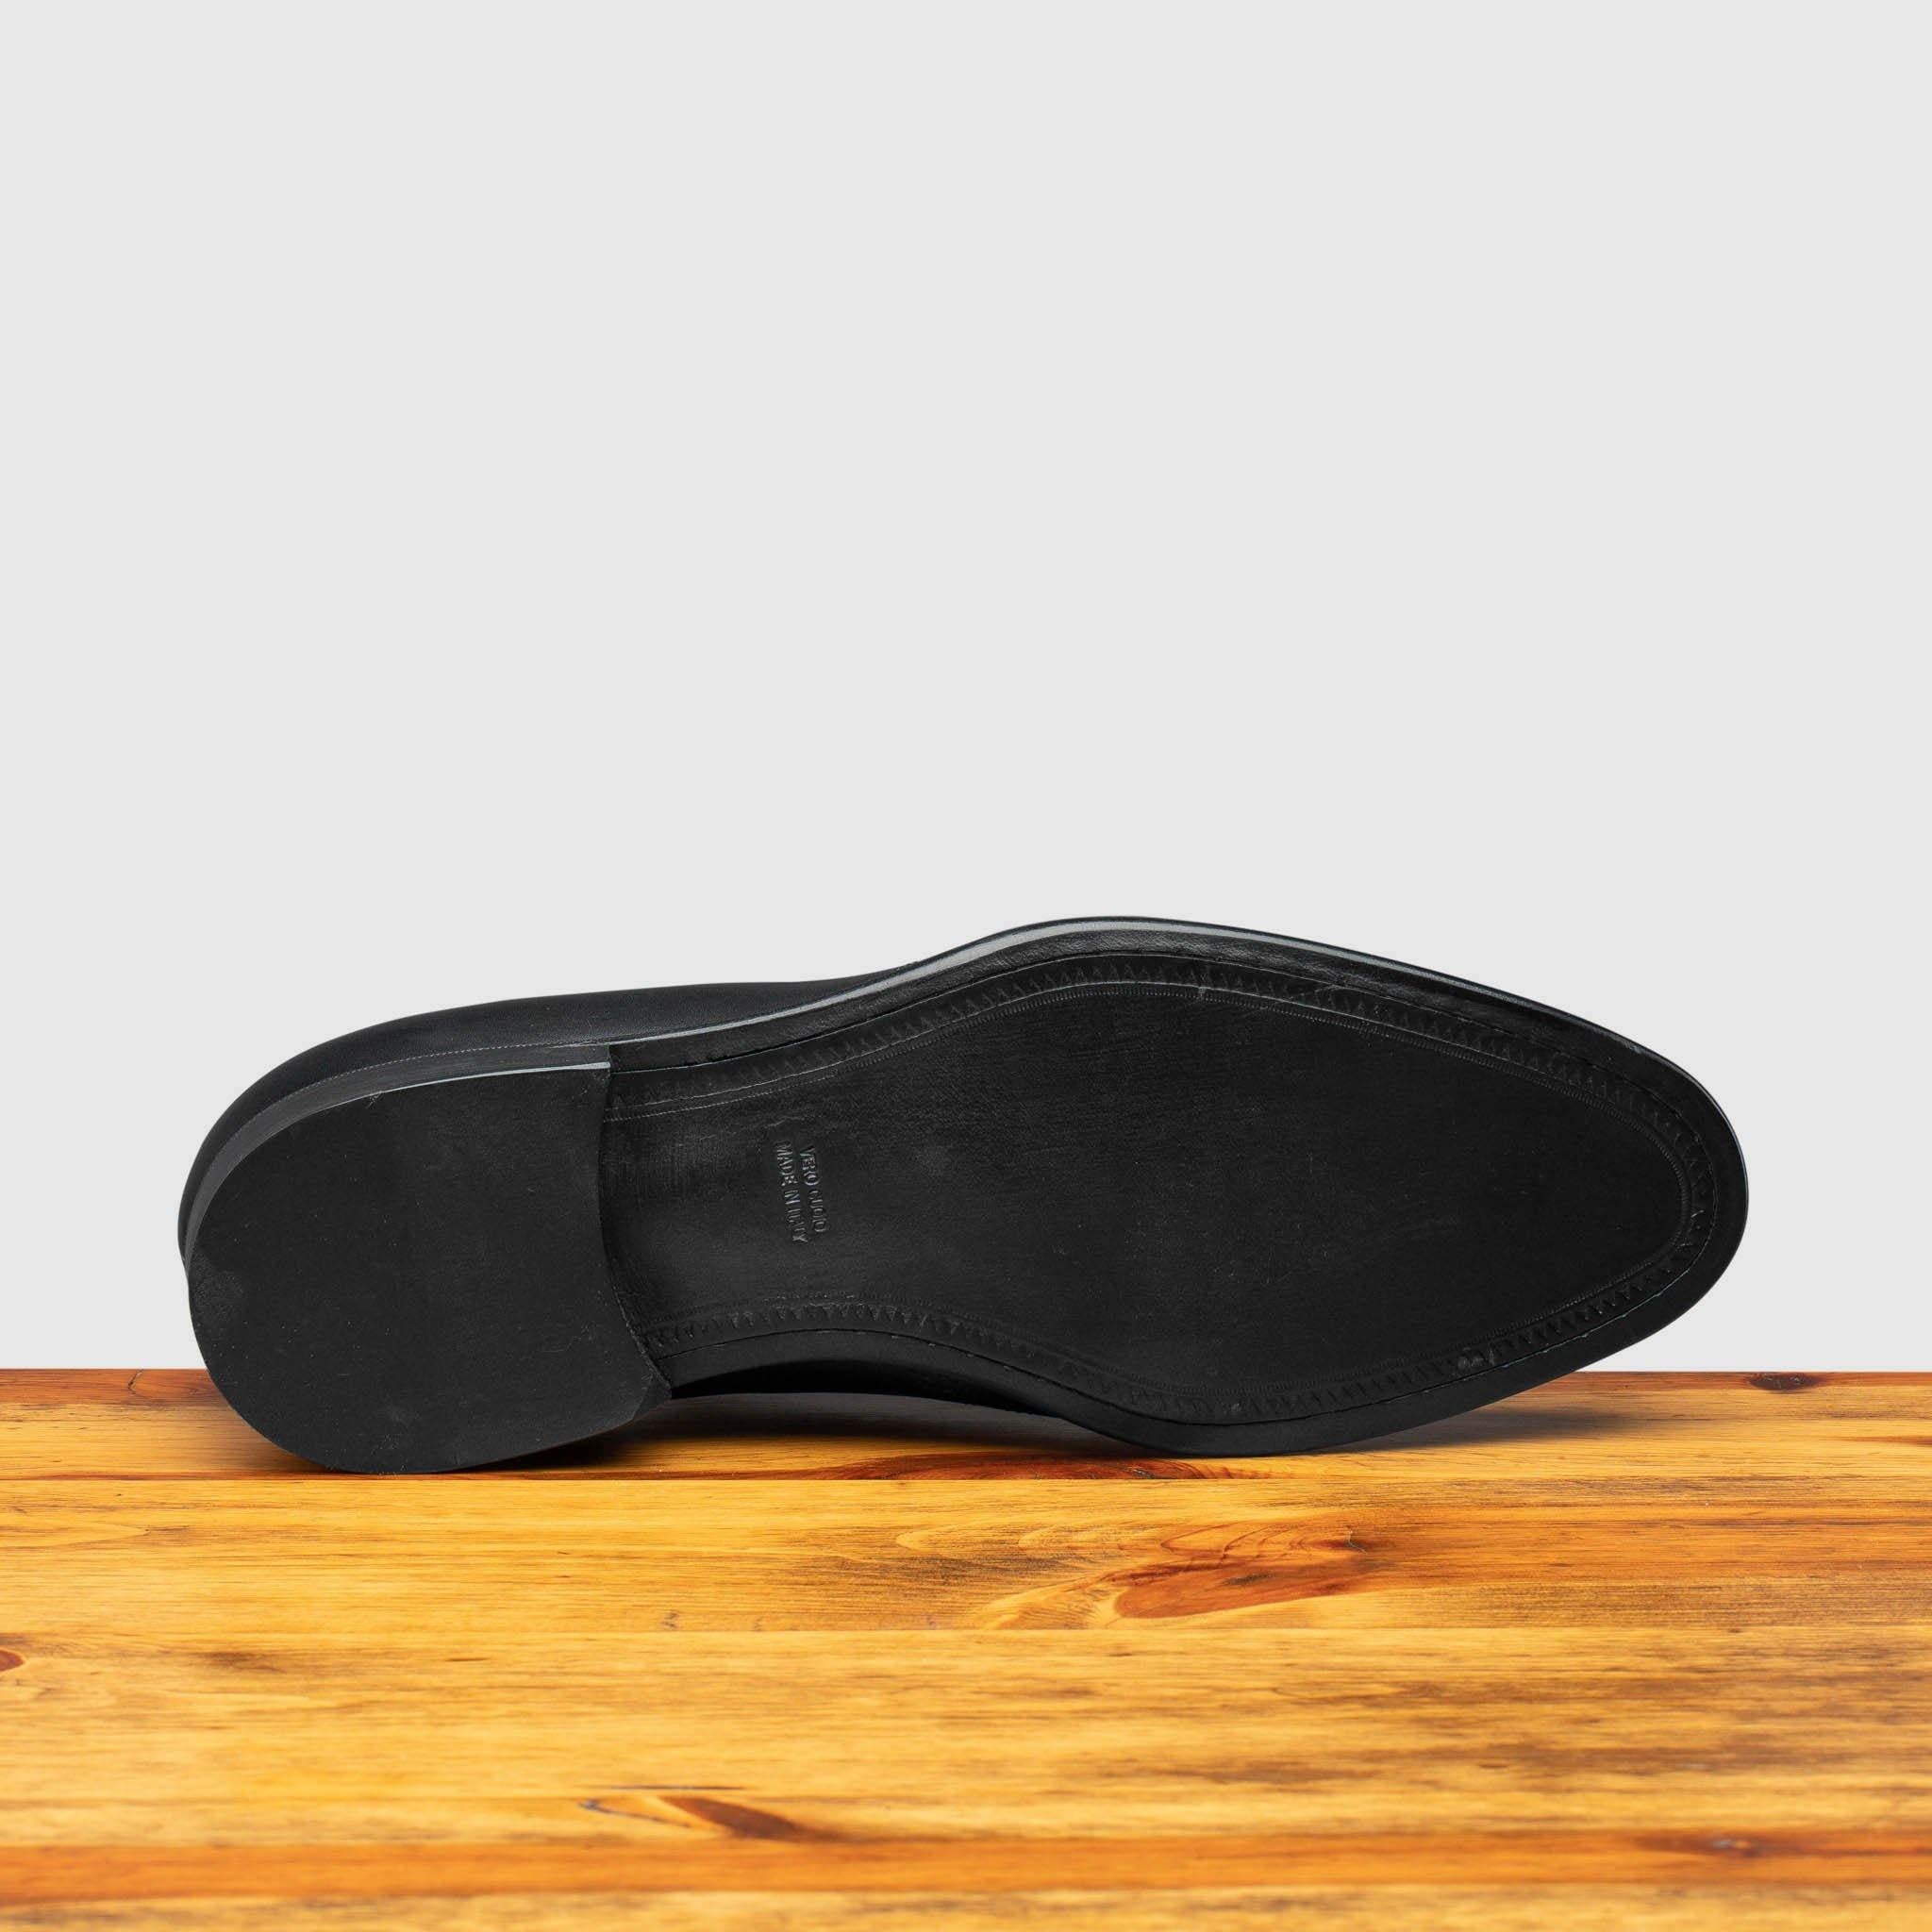 Full leather outsole of H742 Calzoleria Toscana Black Balmoral Lace-up on top of a wooden table